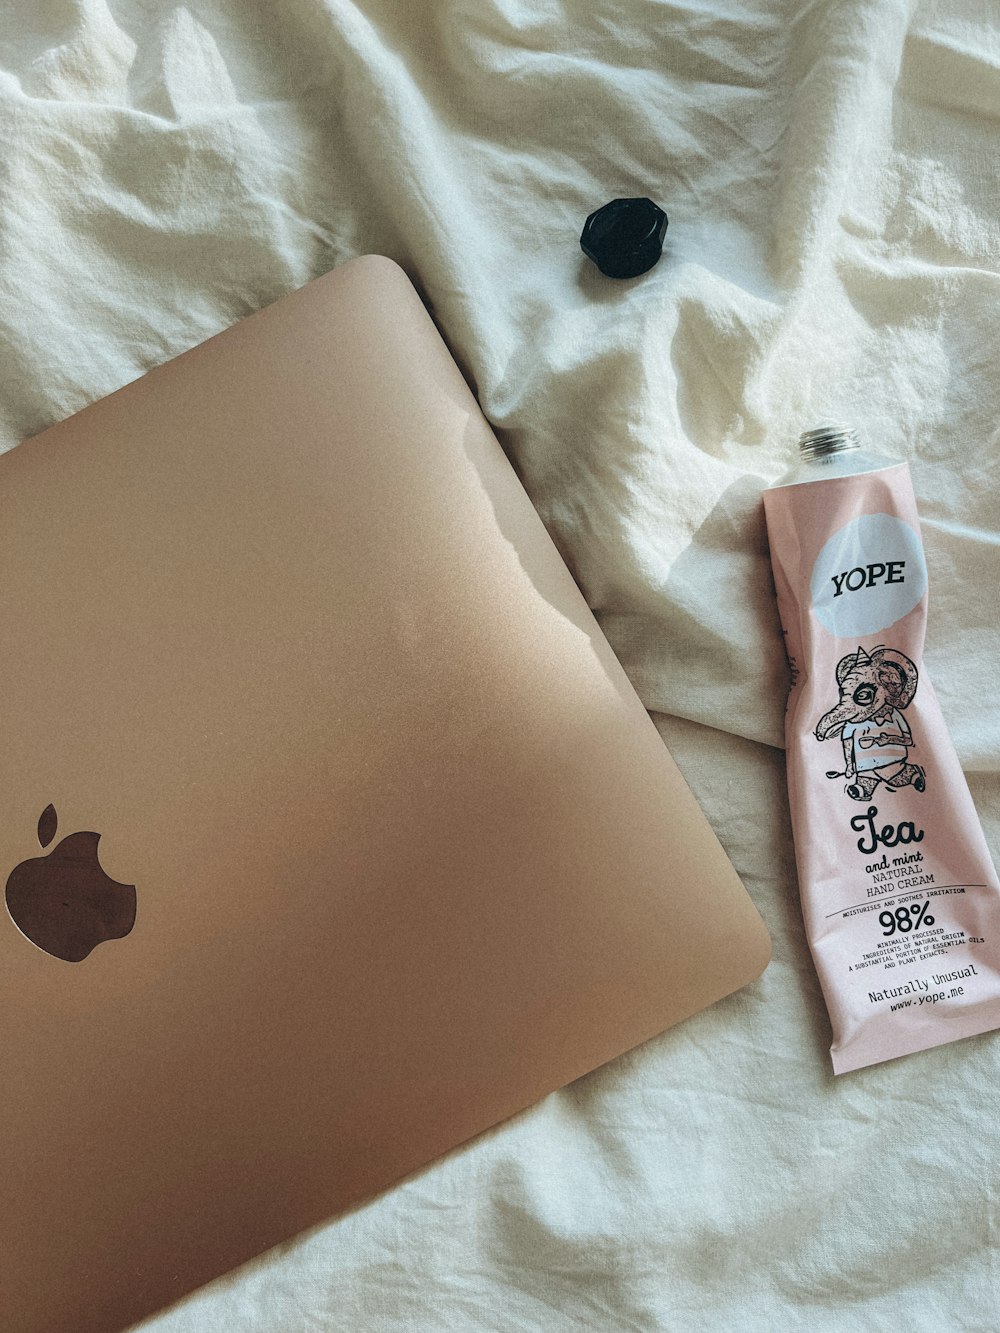 a laptop and a tube of toothpaste on a bed